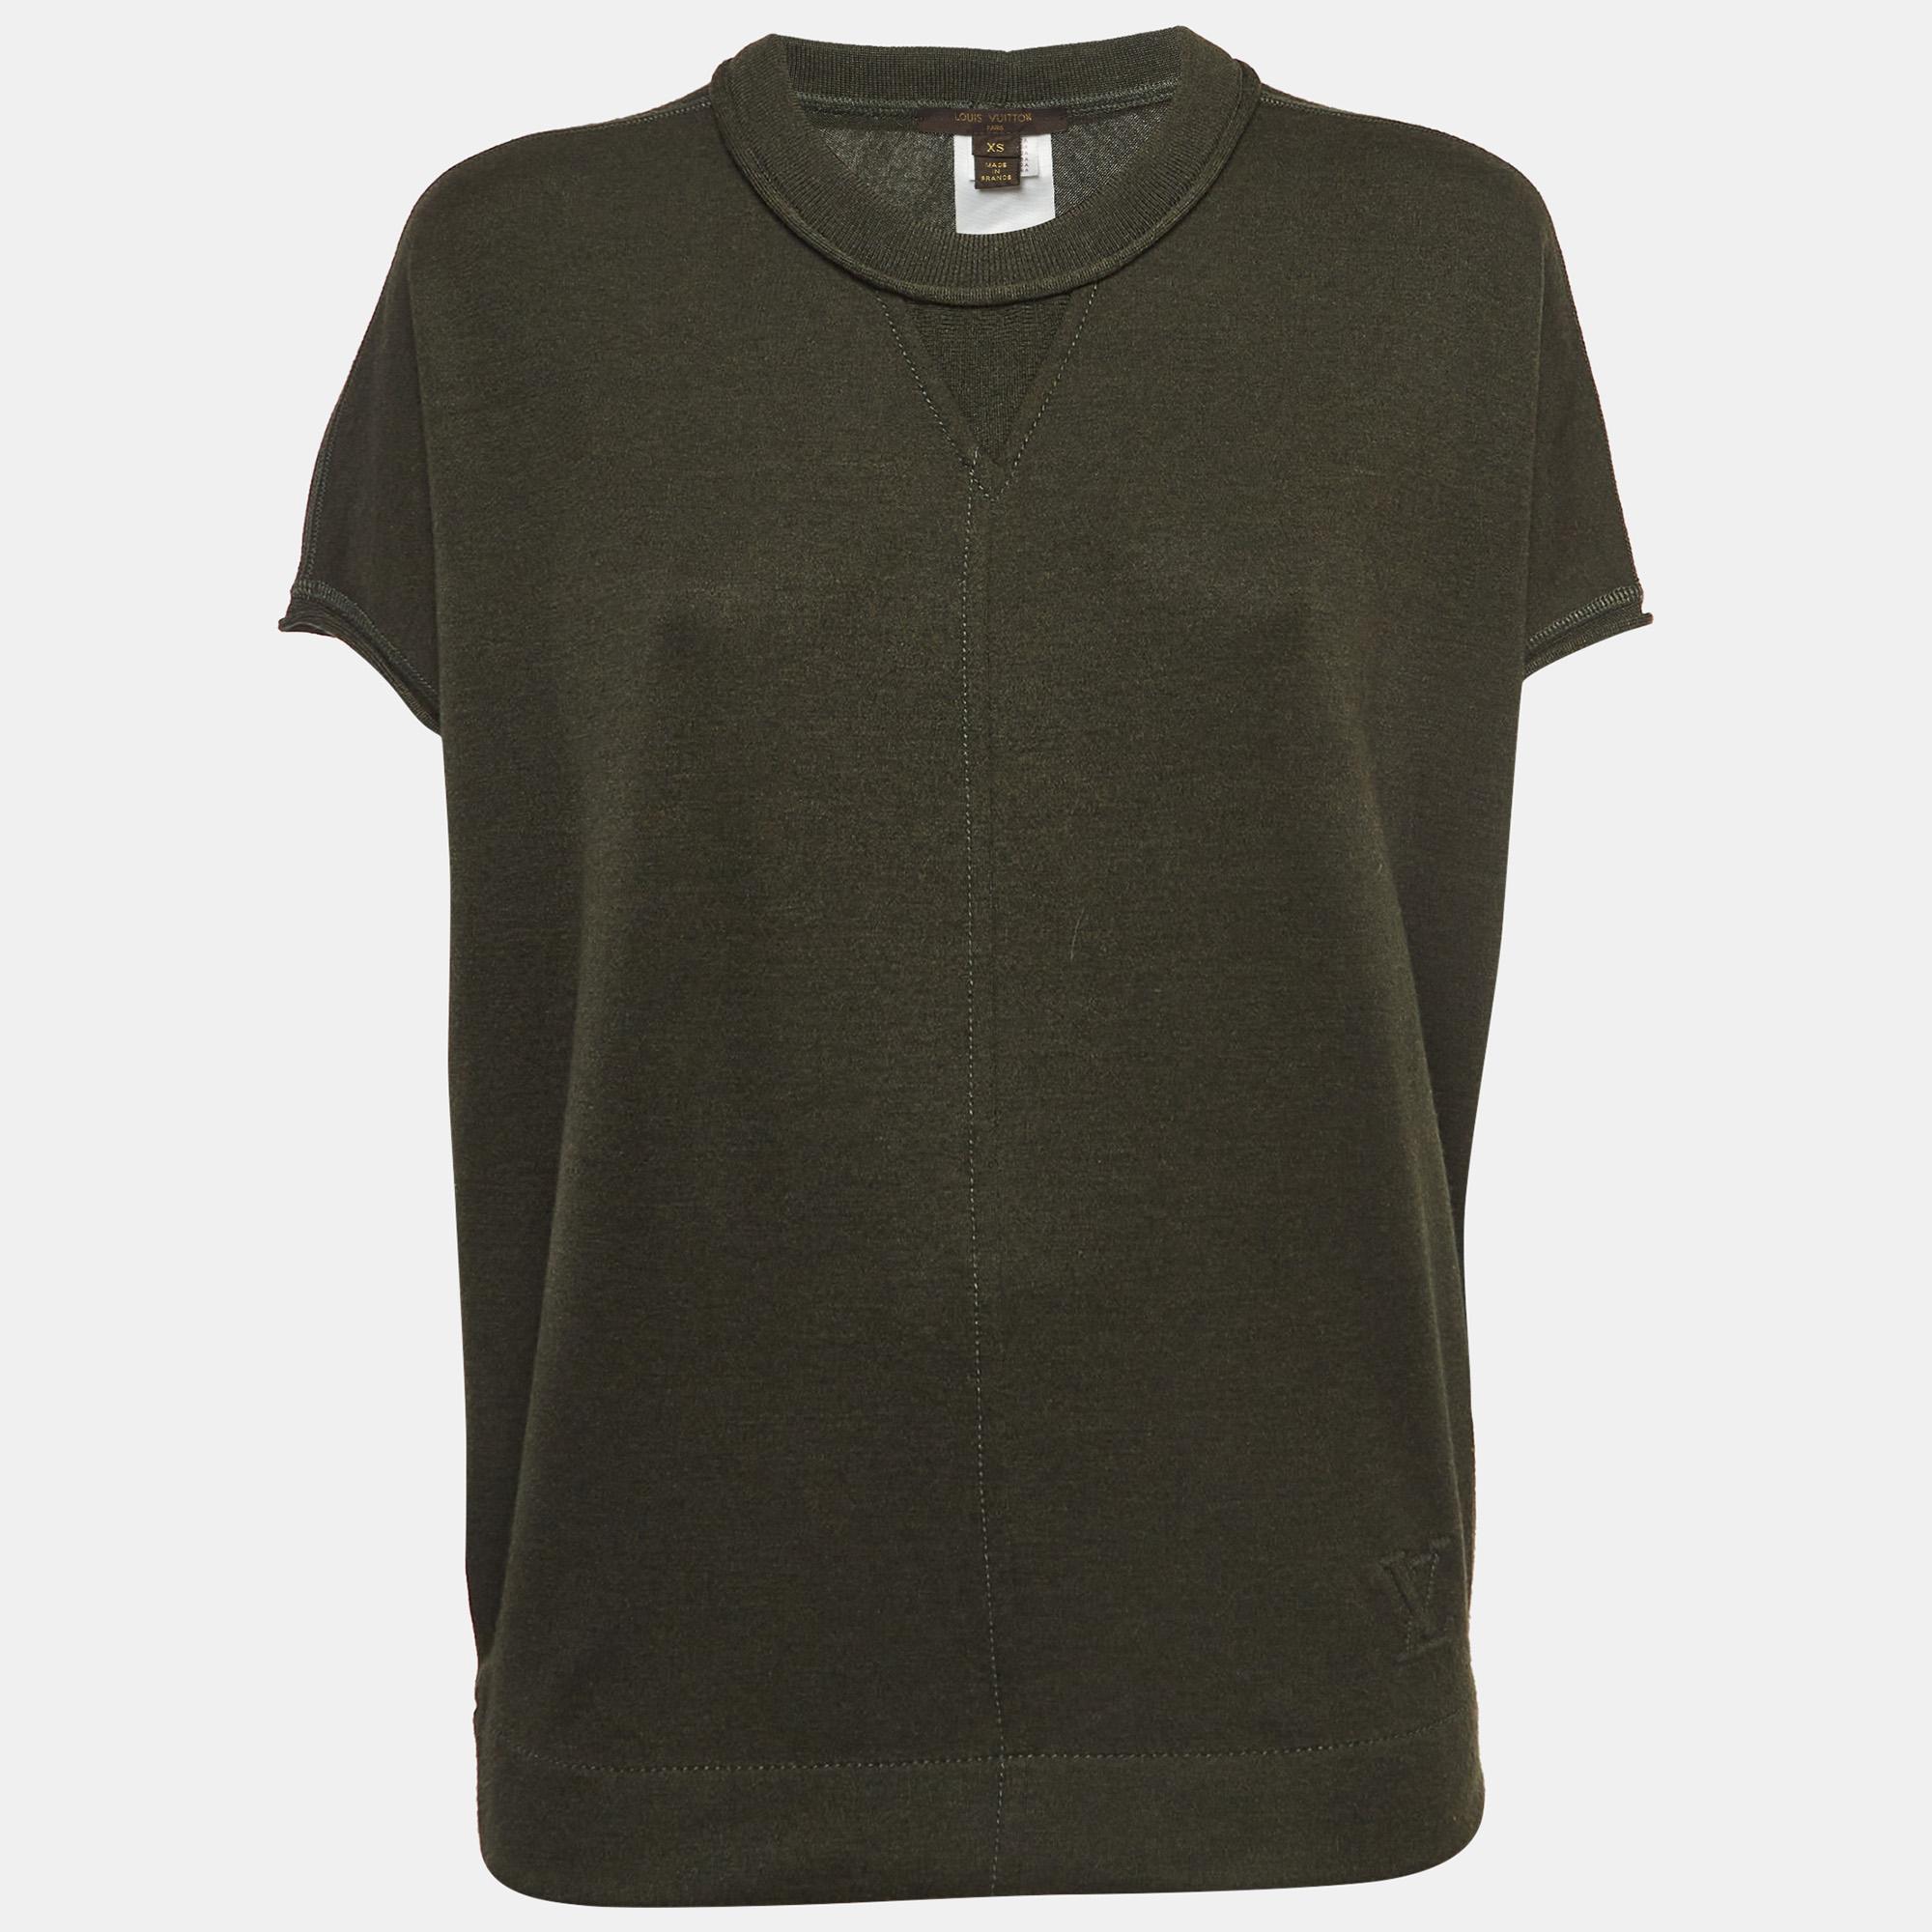 Louis vuitton military green logo embossed cashmere & silk knit top xs